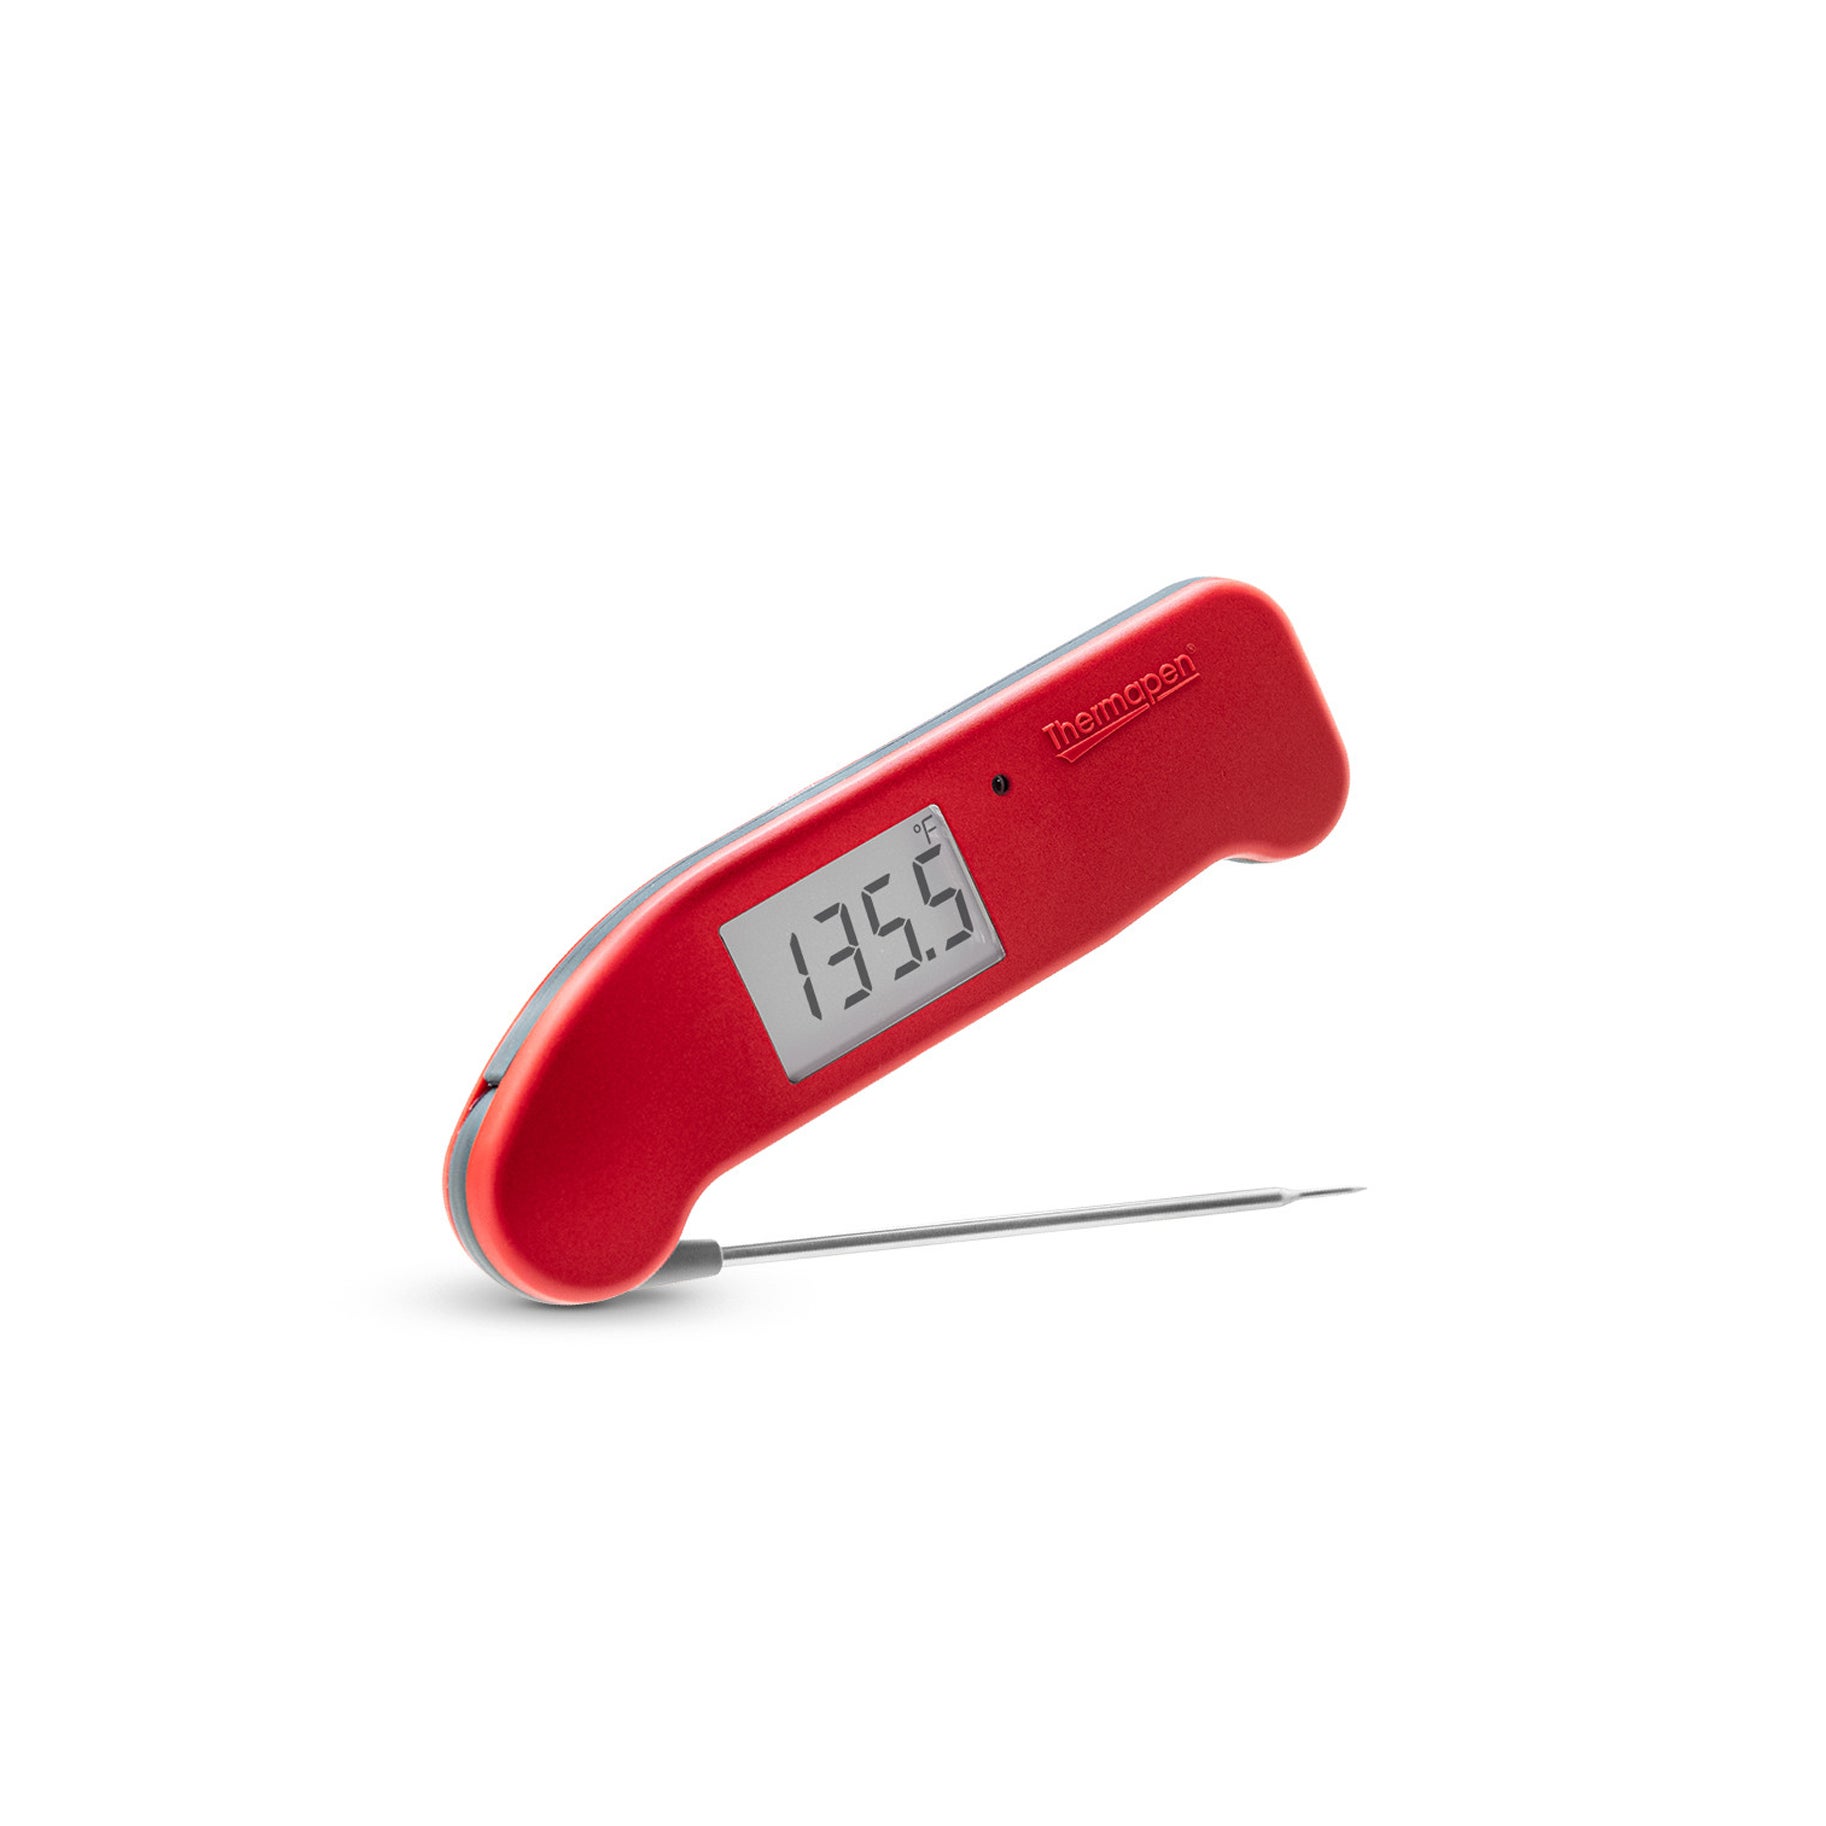 The Best Wireless Meat Thermometers for Budding Pitmasters